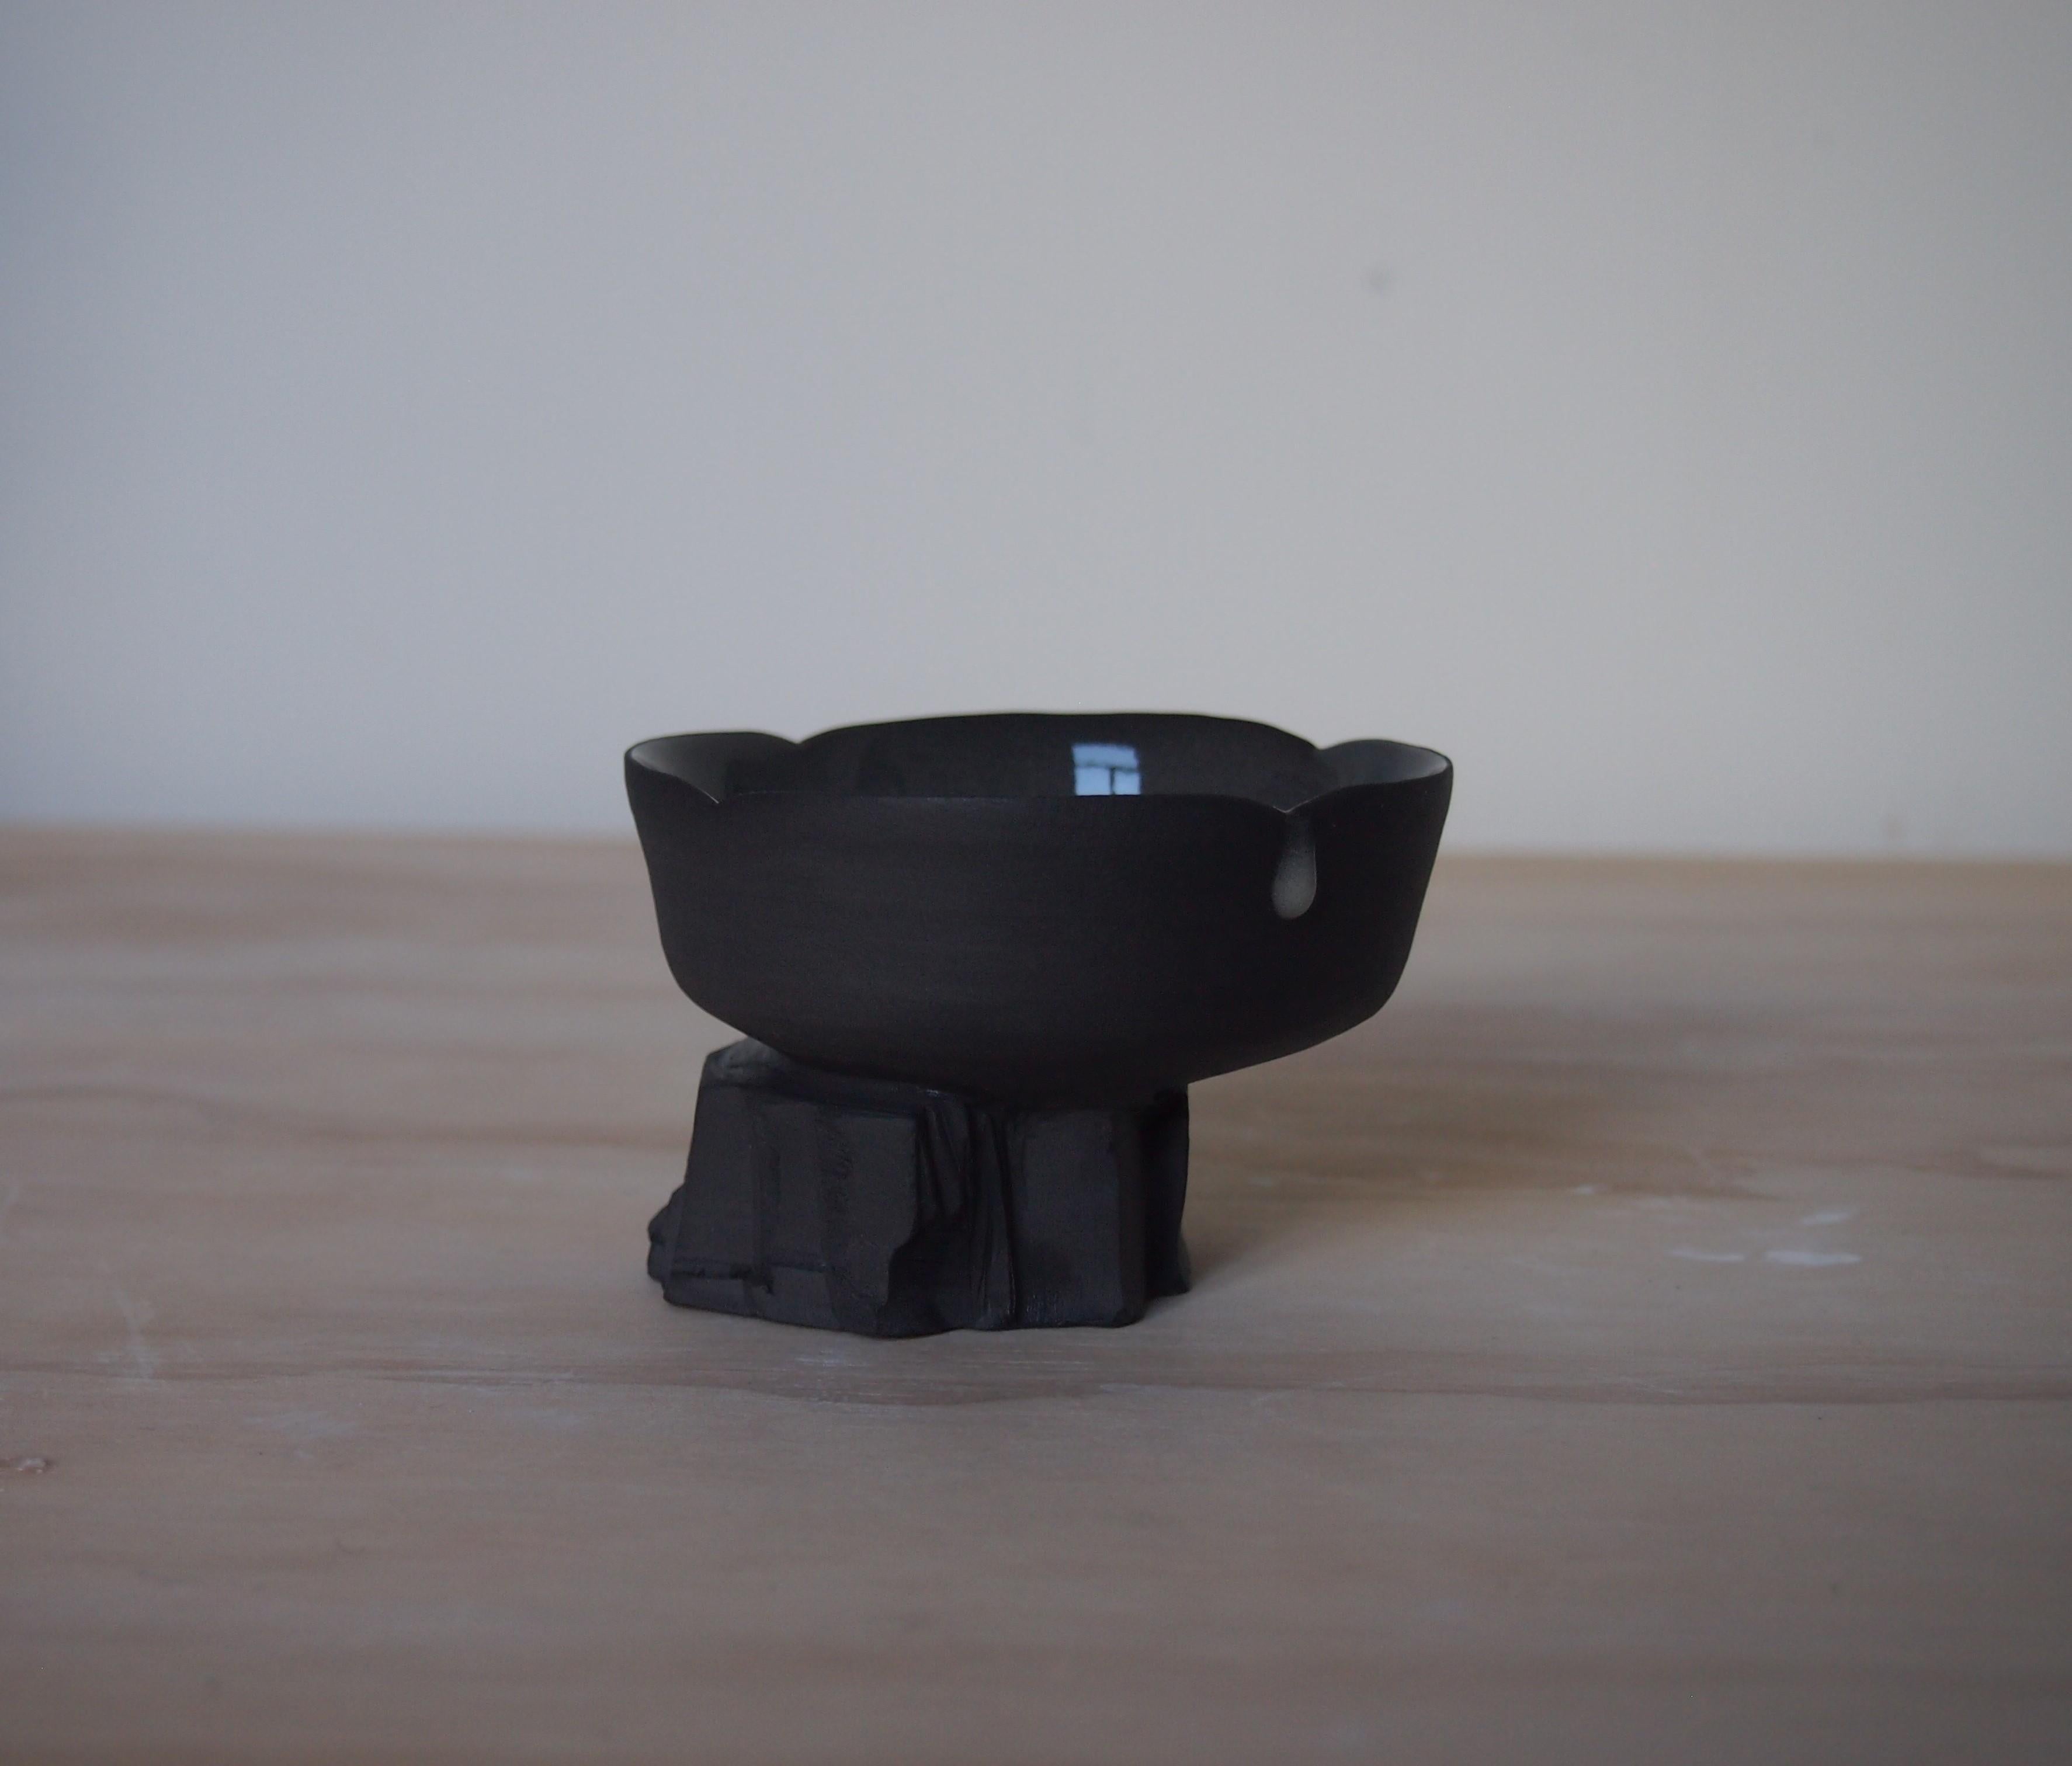 Short Quarry Cup by Liyang Zhang
One Of A Kind.
Dimensions: D 8 x W 8 x H 6 cm.
Materials: Black porcelain. 

Made with single peice of black porcelain. The top is made on the wheel and bottom is made by tearing and chiselling.  The form reveals